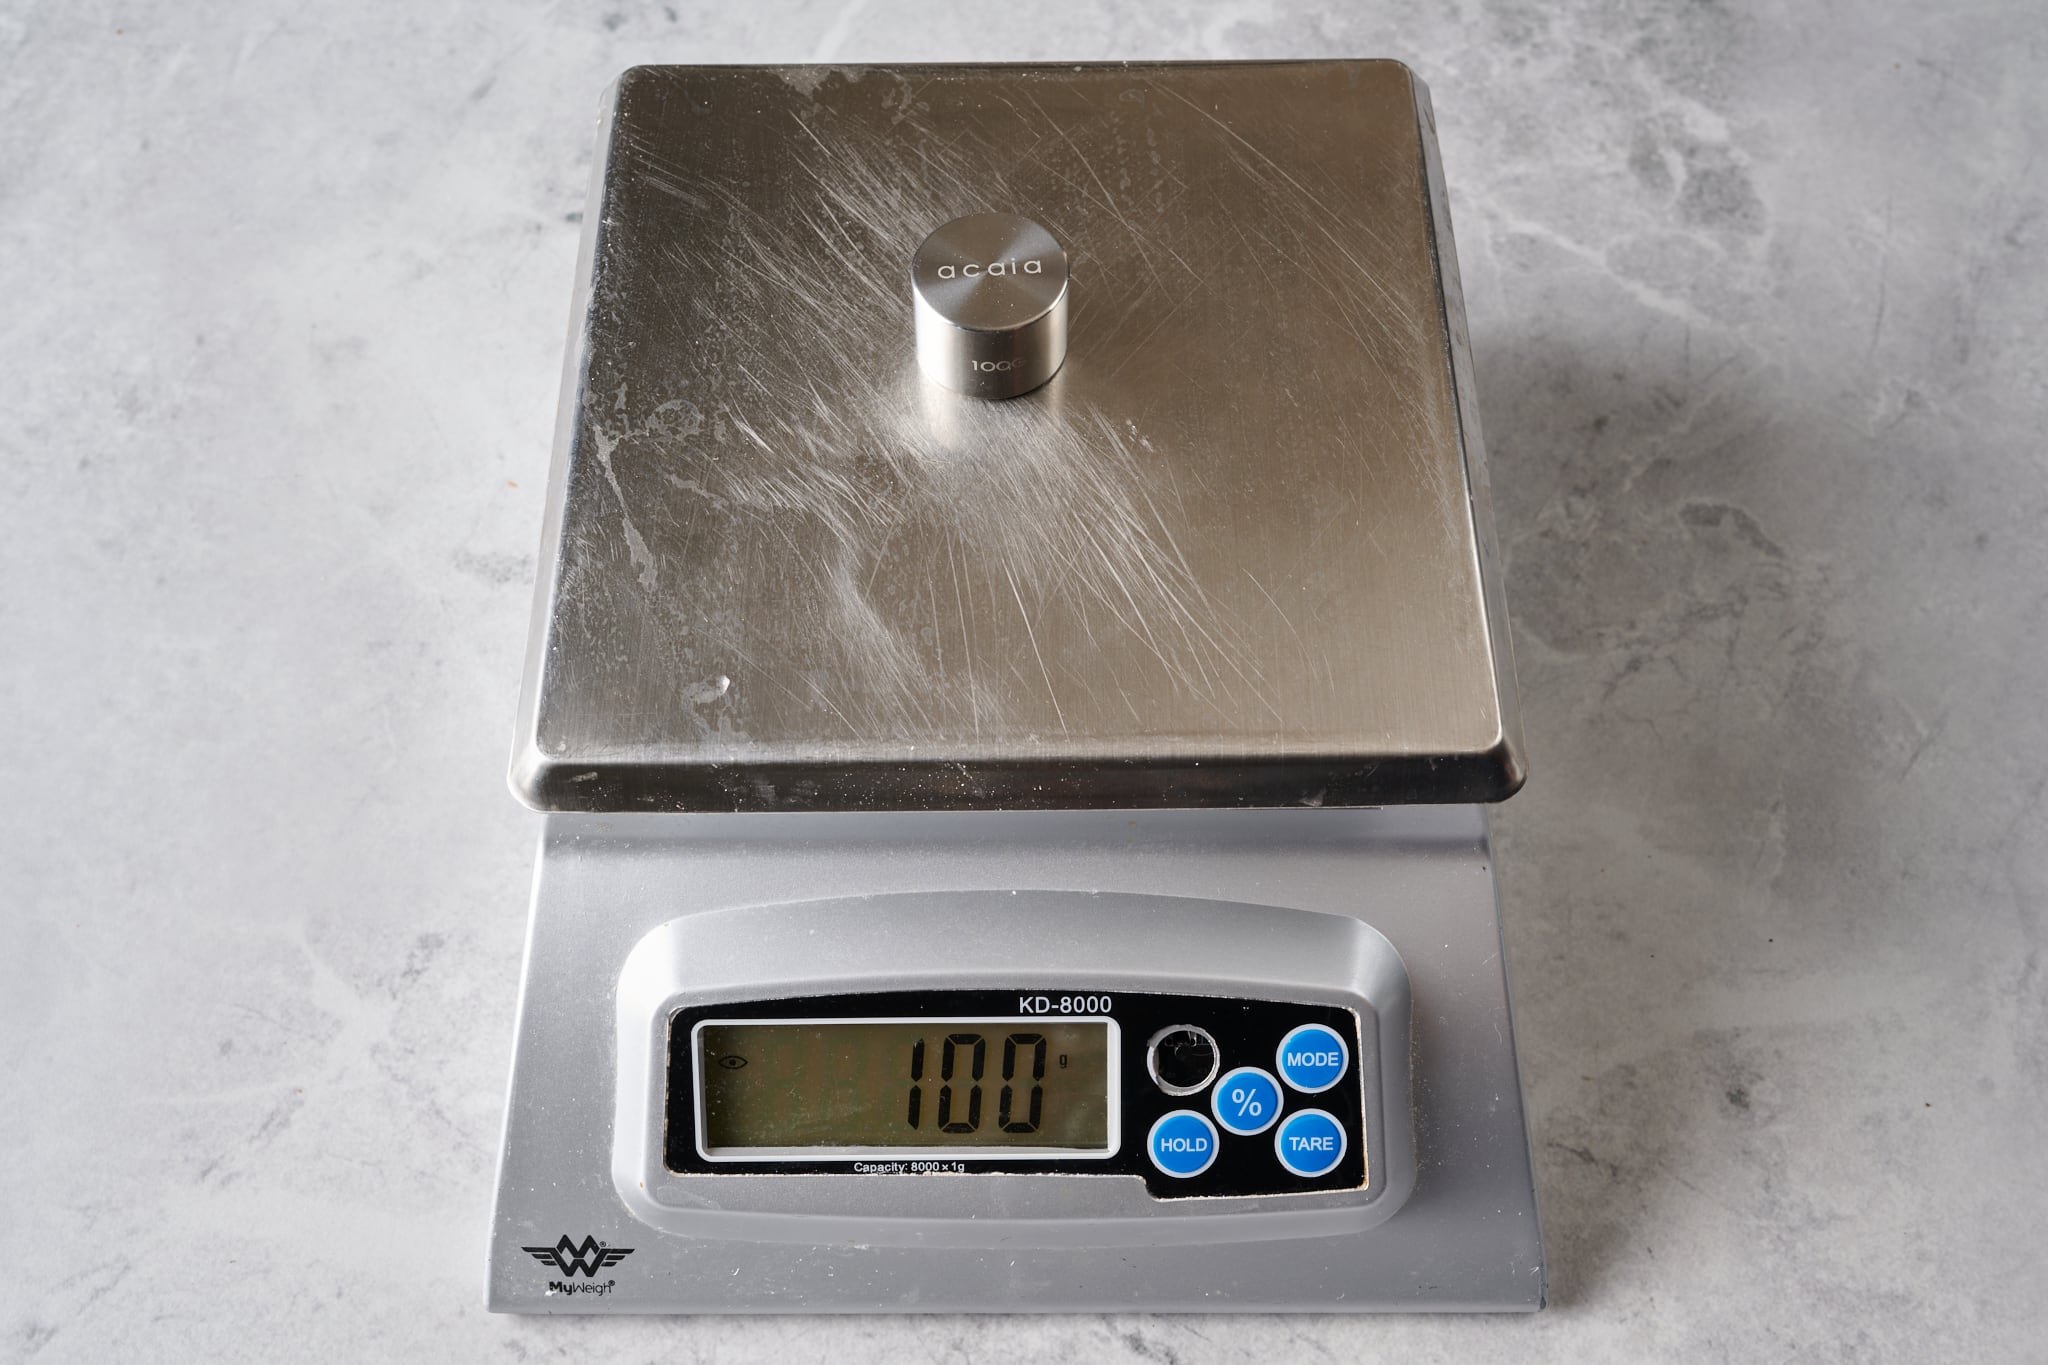 https://www.theperfectloaf.com/wp-content/uploads/2023/01/theperfectloaf_best_kitchen_scale_for_making_bread_calibration.jpg